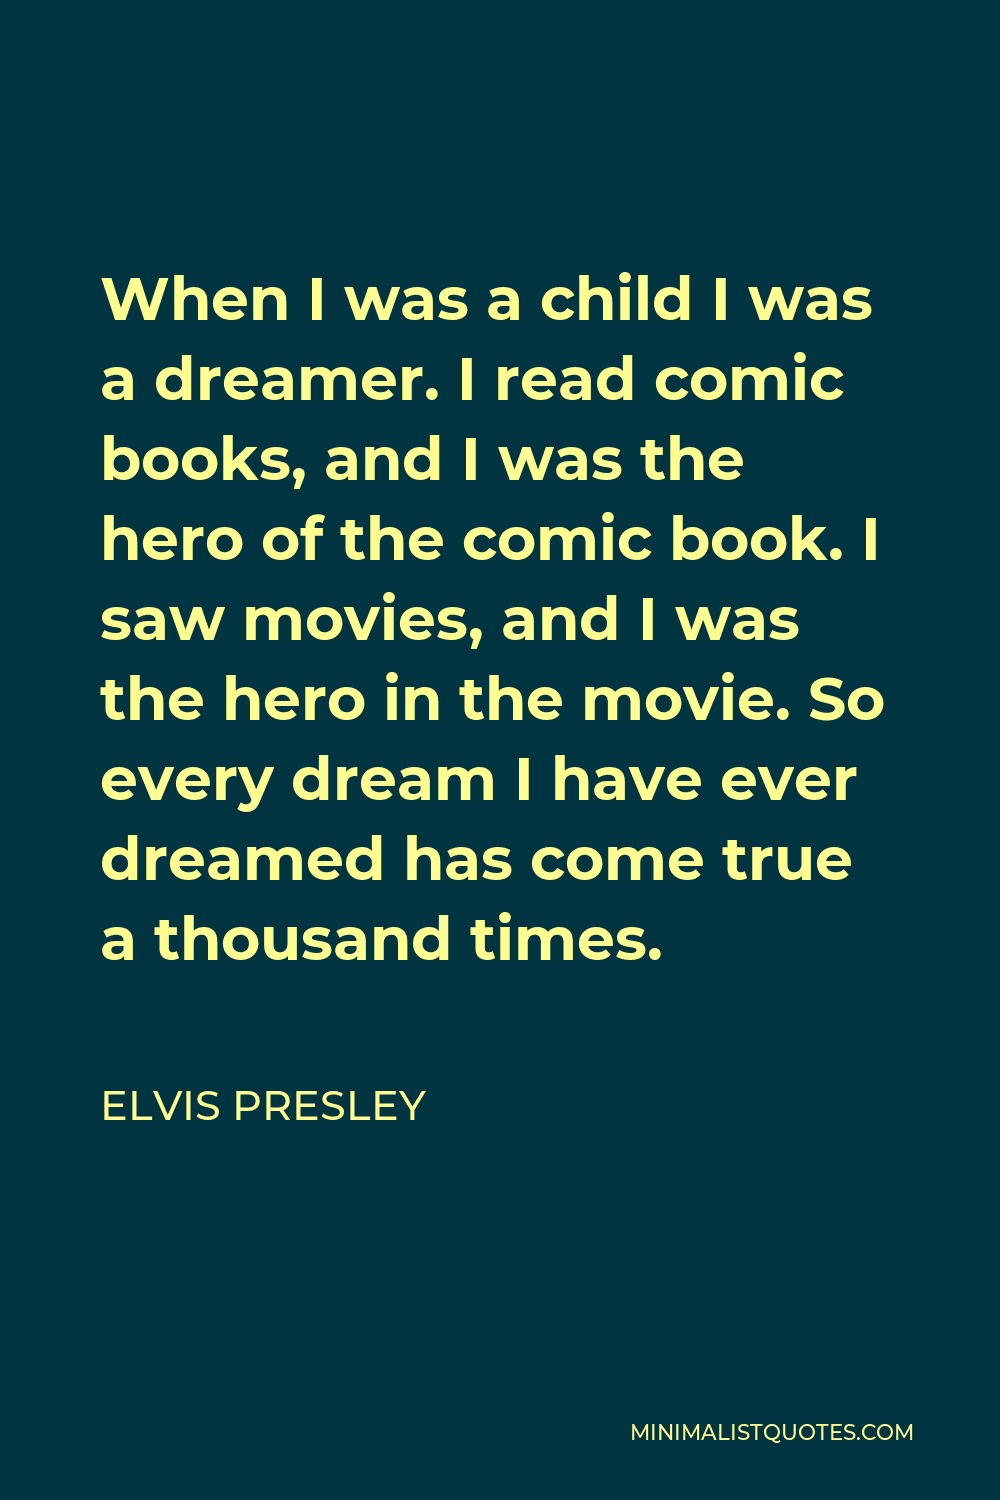 Elvis Presley Quote - When I was a child I was a dreamer. I read comic books, and I was the hero of the comic book. I saw movies, and I was the hero in the movie. So every dream I have ever dreamed has come true a thousand times.